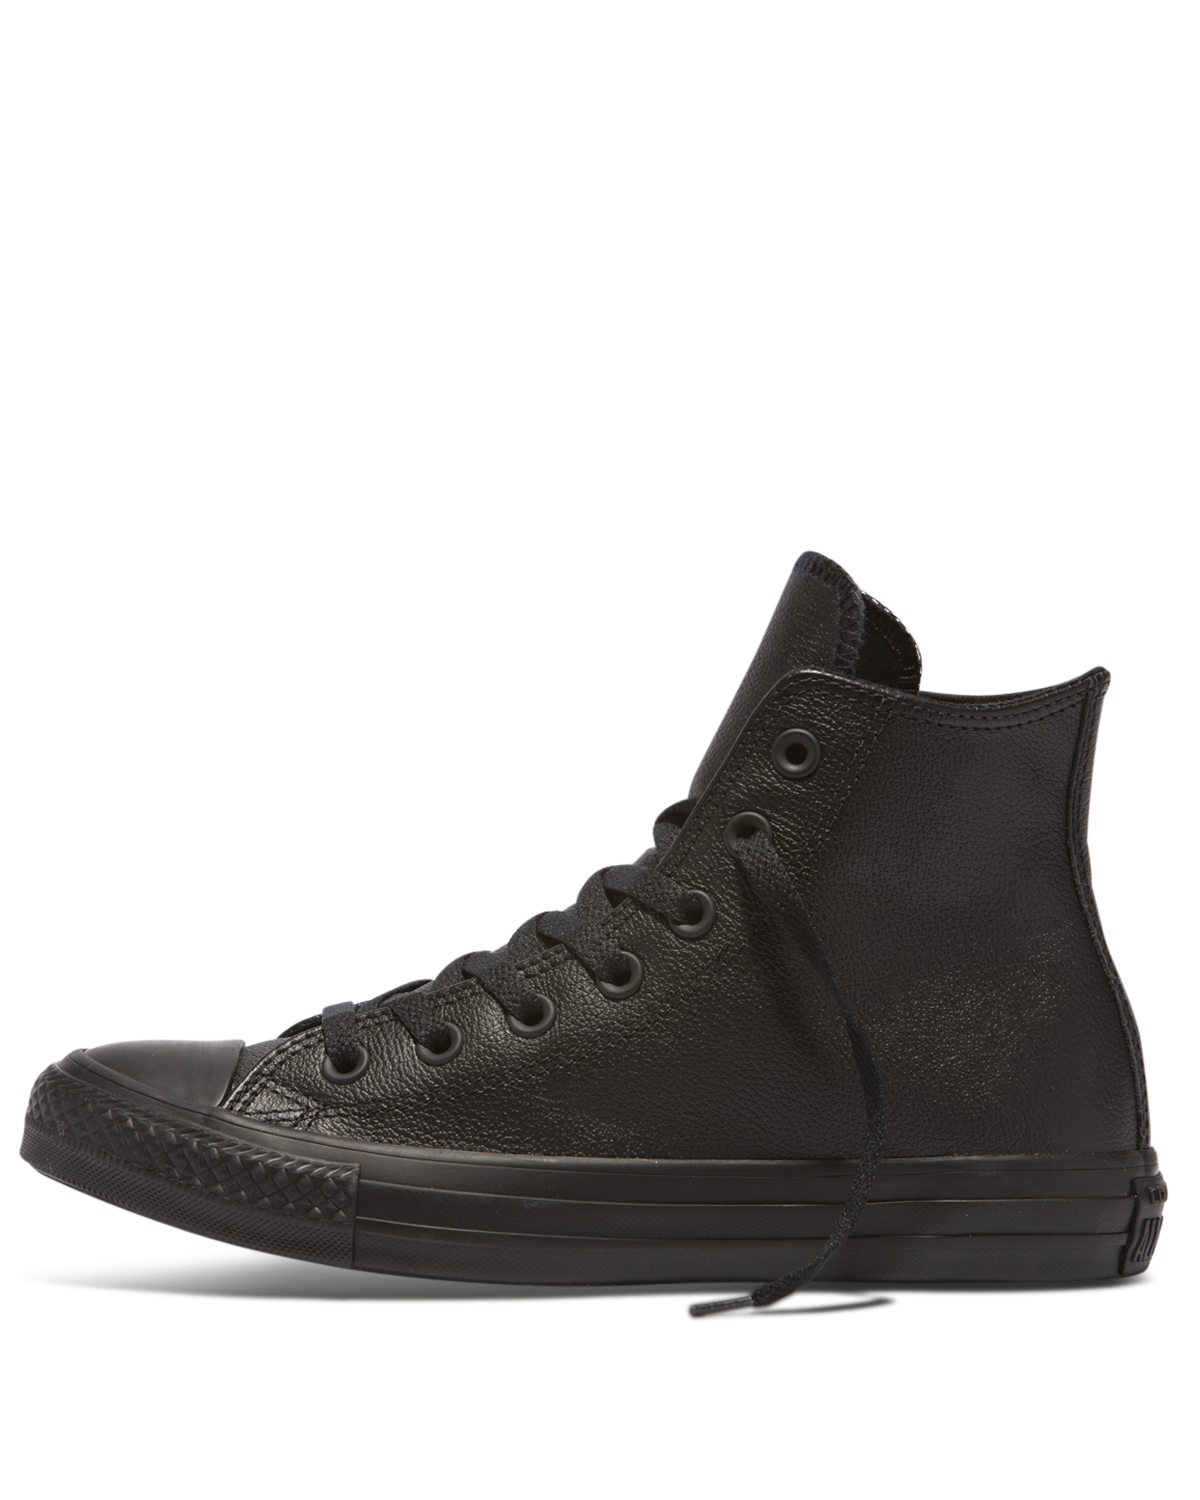 Converse Chuck Taylor Leather High Top 